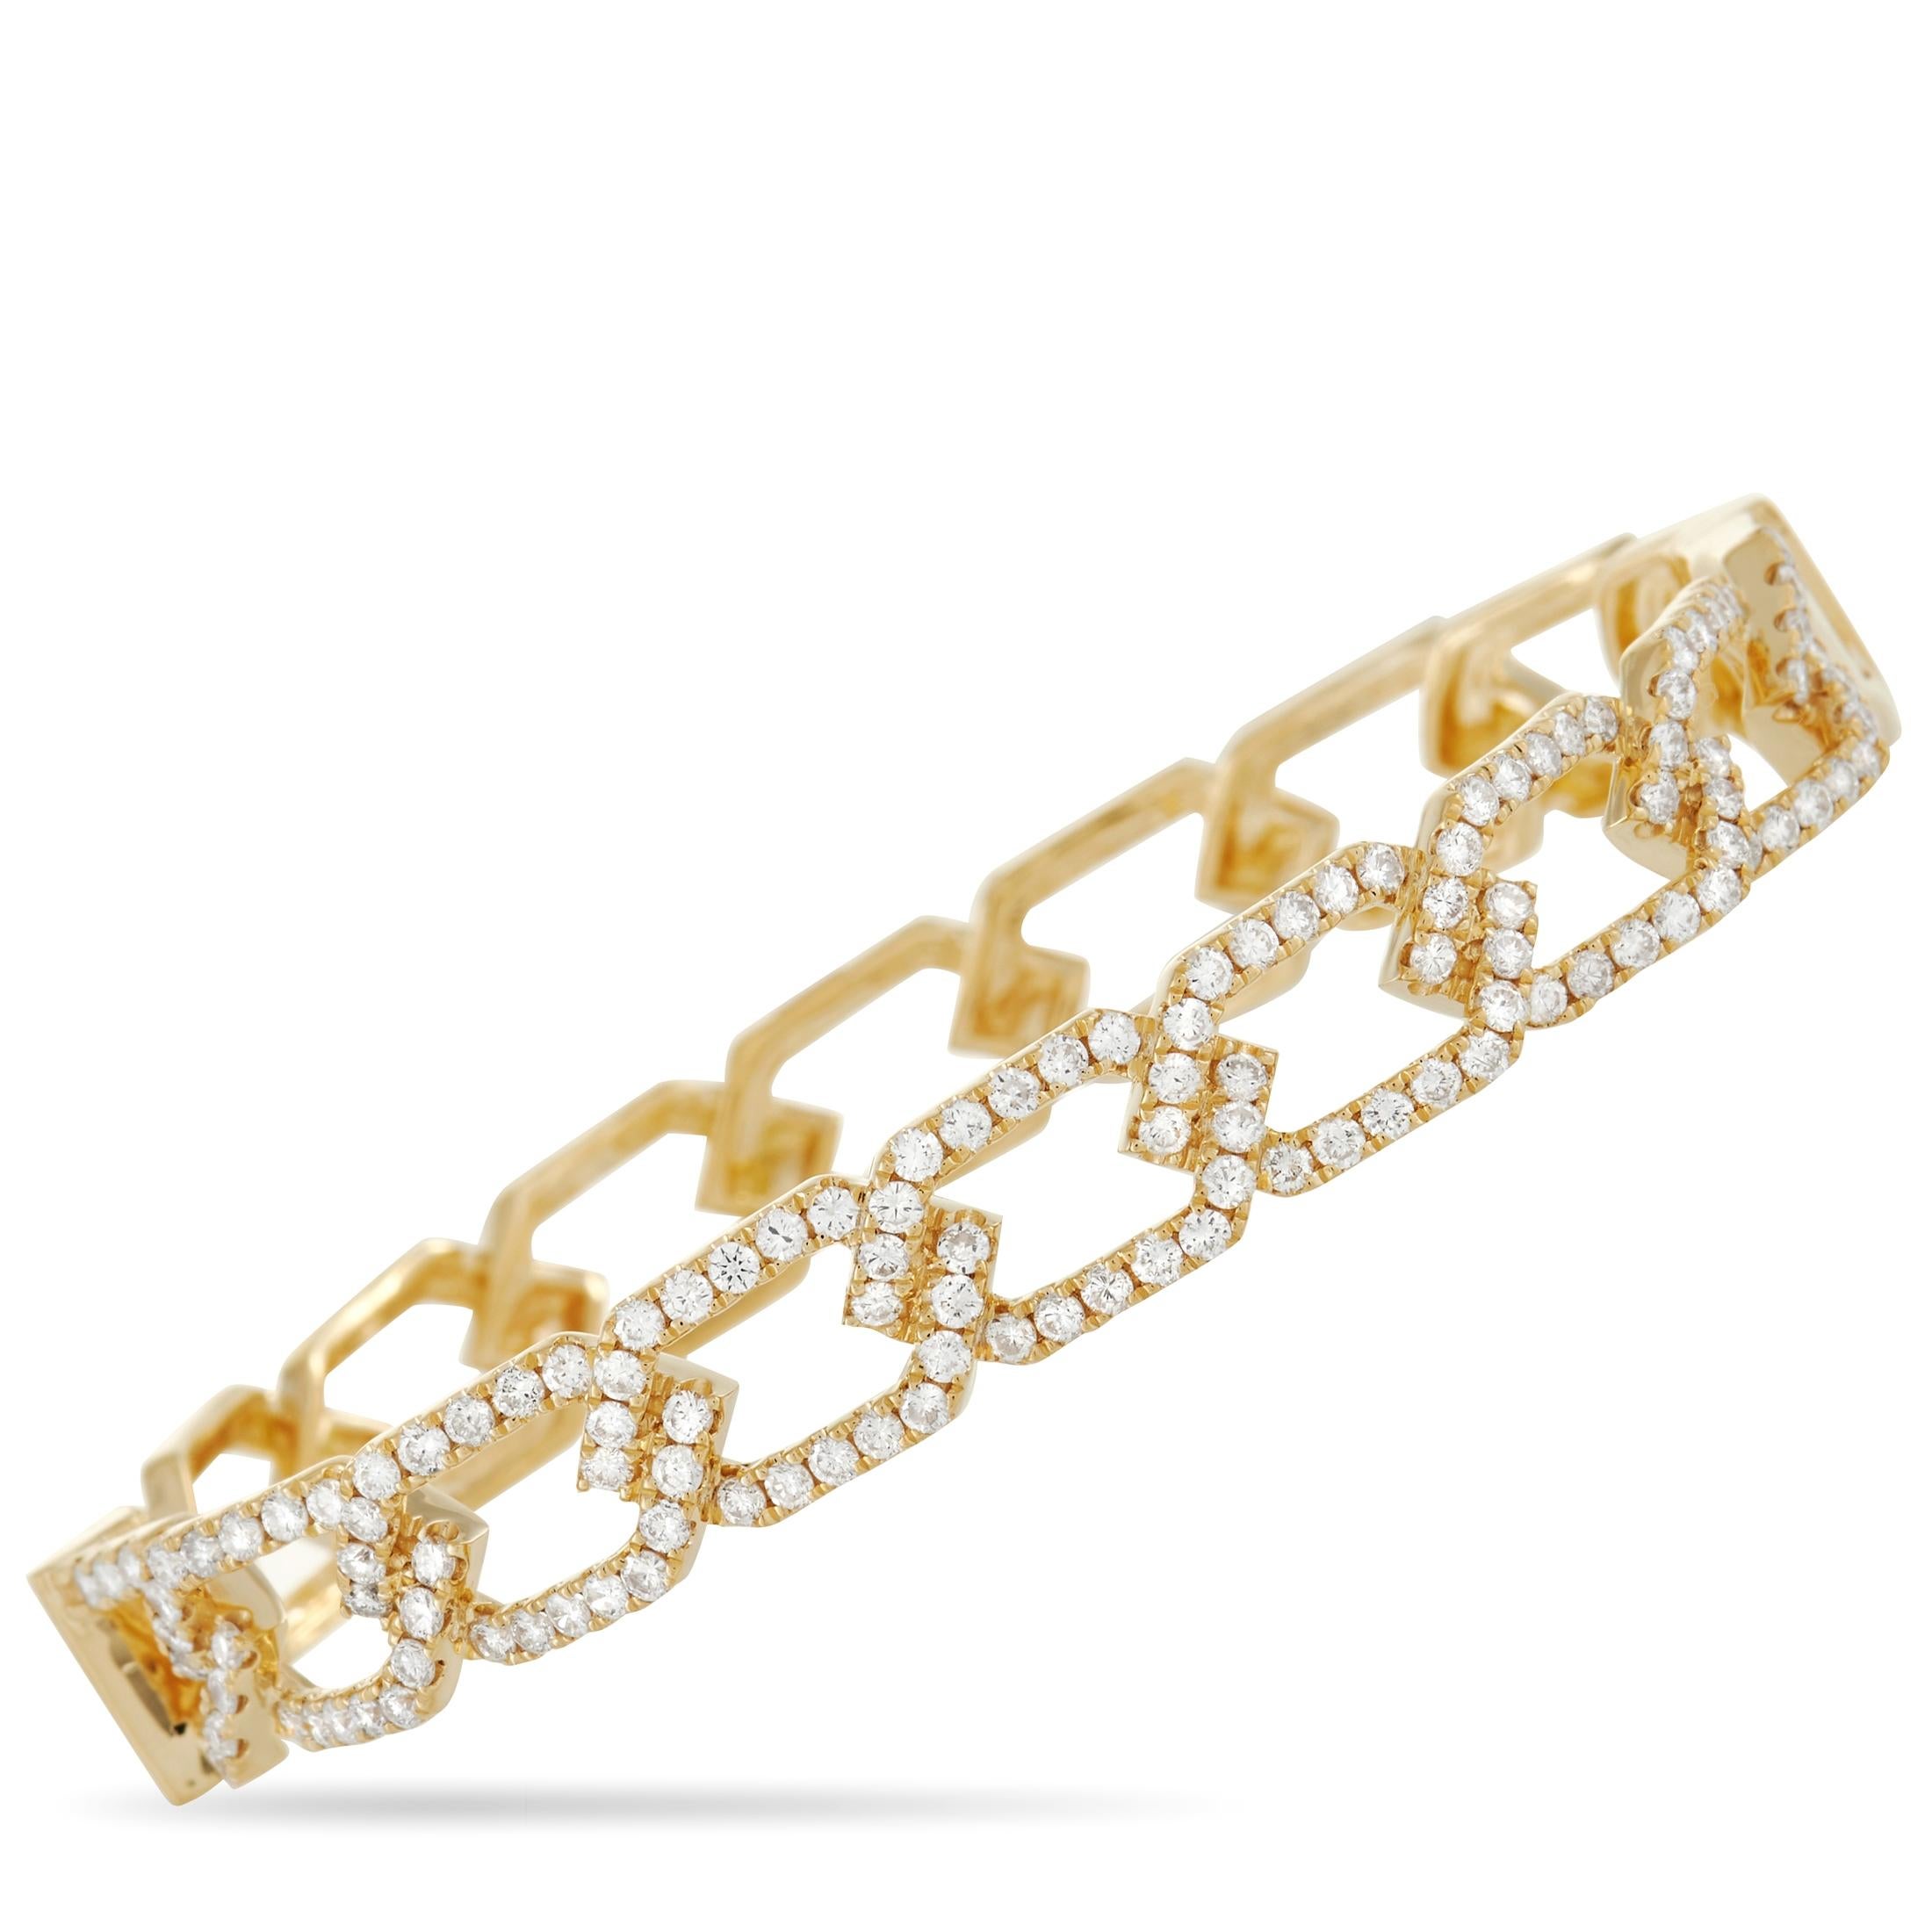 This classy LB Exclusive 18K Yellow Gold 2.03 ct Diamond Bracelet is sure to stand out. The bracelet is made with uniquely shaped intertwined links of 18K yellow gold that are set with 2.03 carats of round-cut diamonds. The bracelet measures 6.3